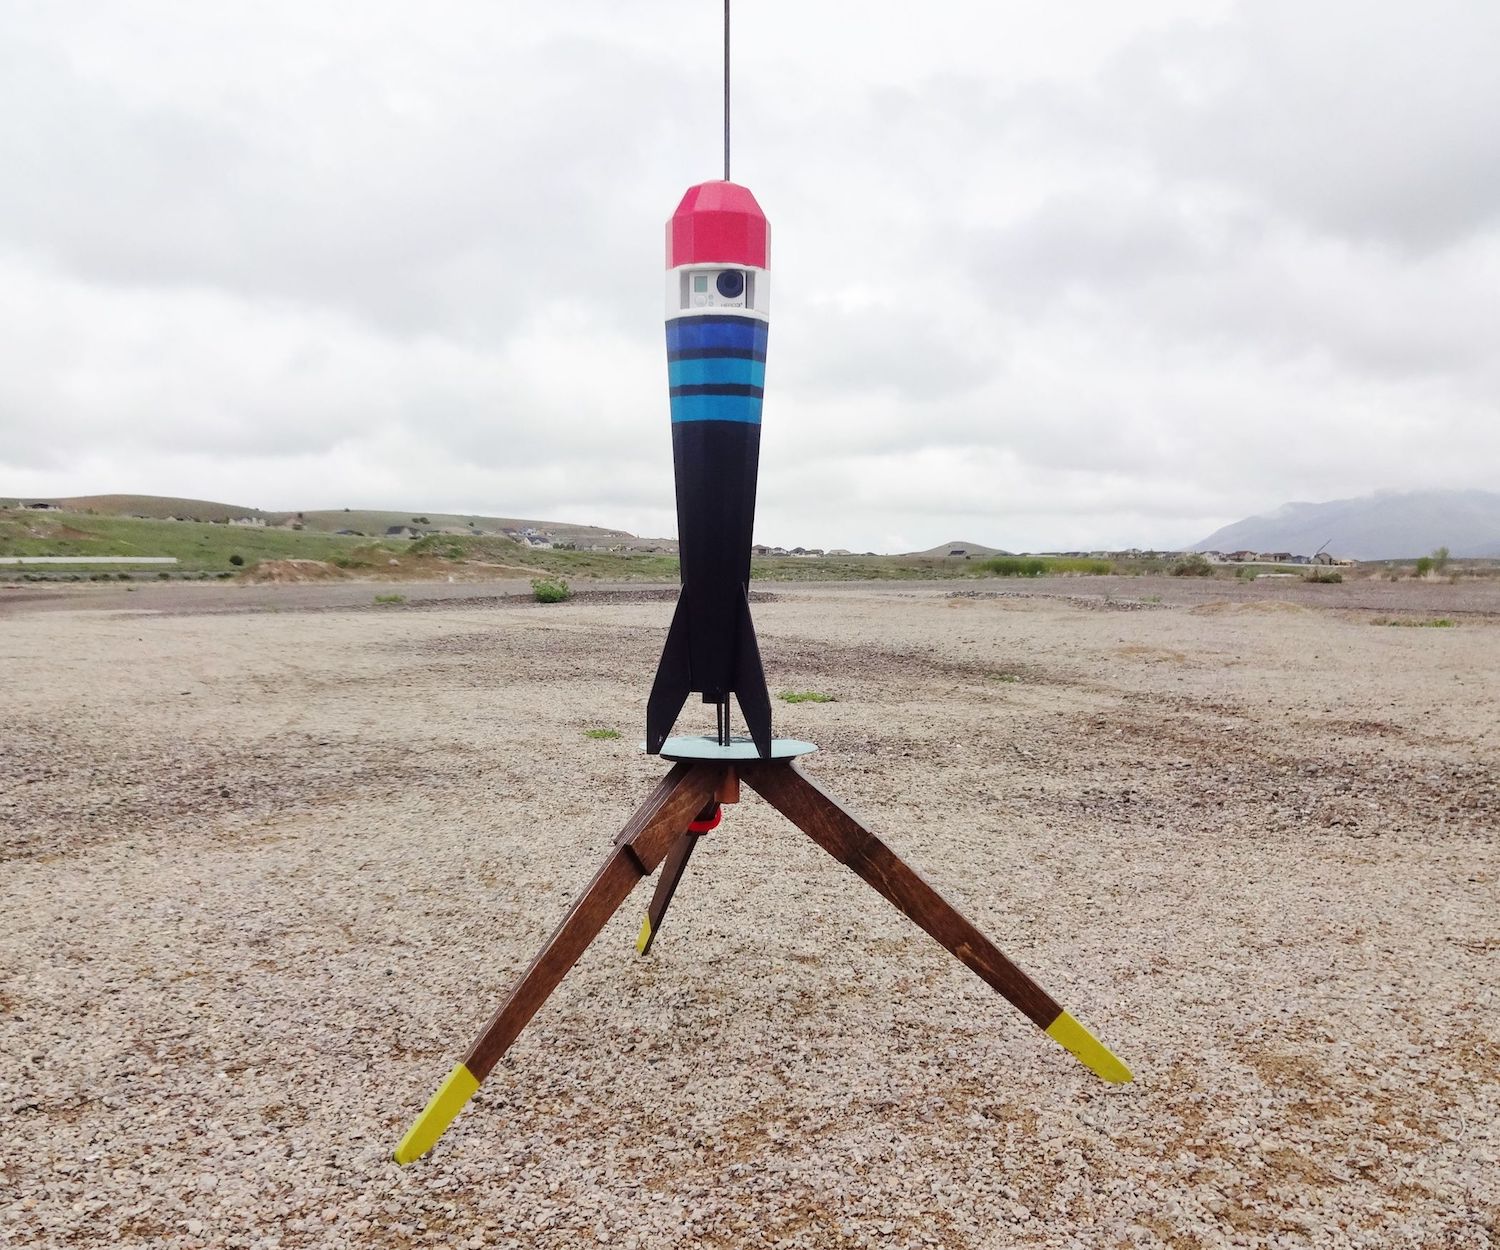 I lost my first one almost immediately when the wind picked up. Photo credit: [Instructables](http://www.instructables.com/id/Model-Rocket-Launch-Pad/)